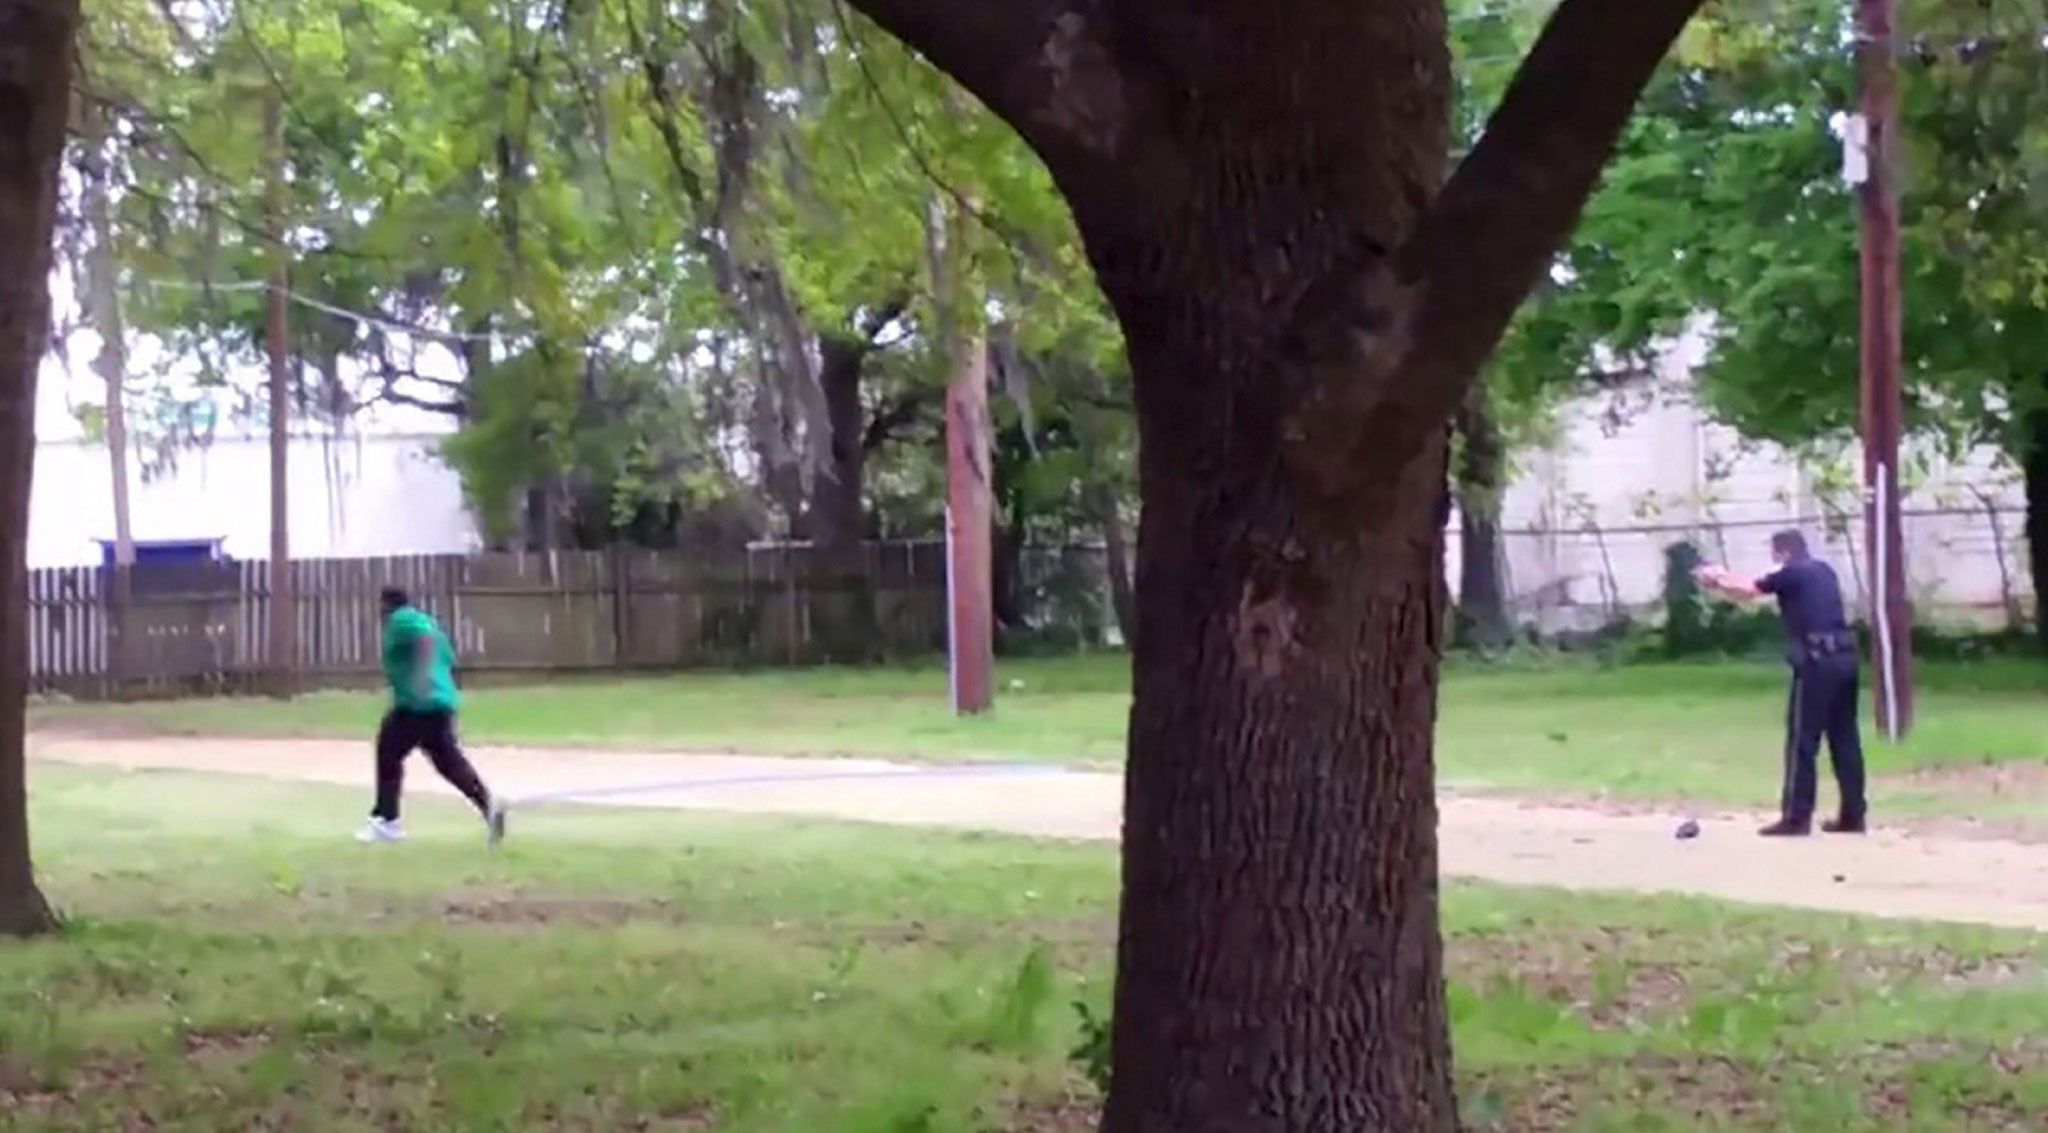 A still from the video appears to show Michael Slager shooting Walter Scott as he runs away